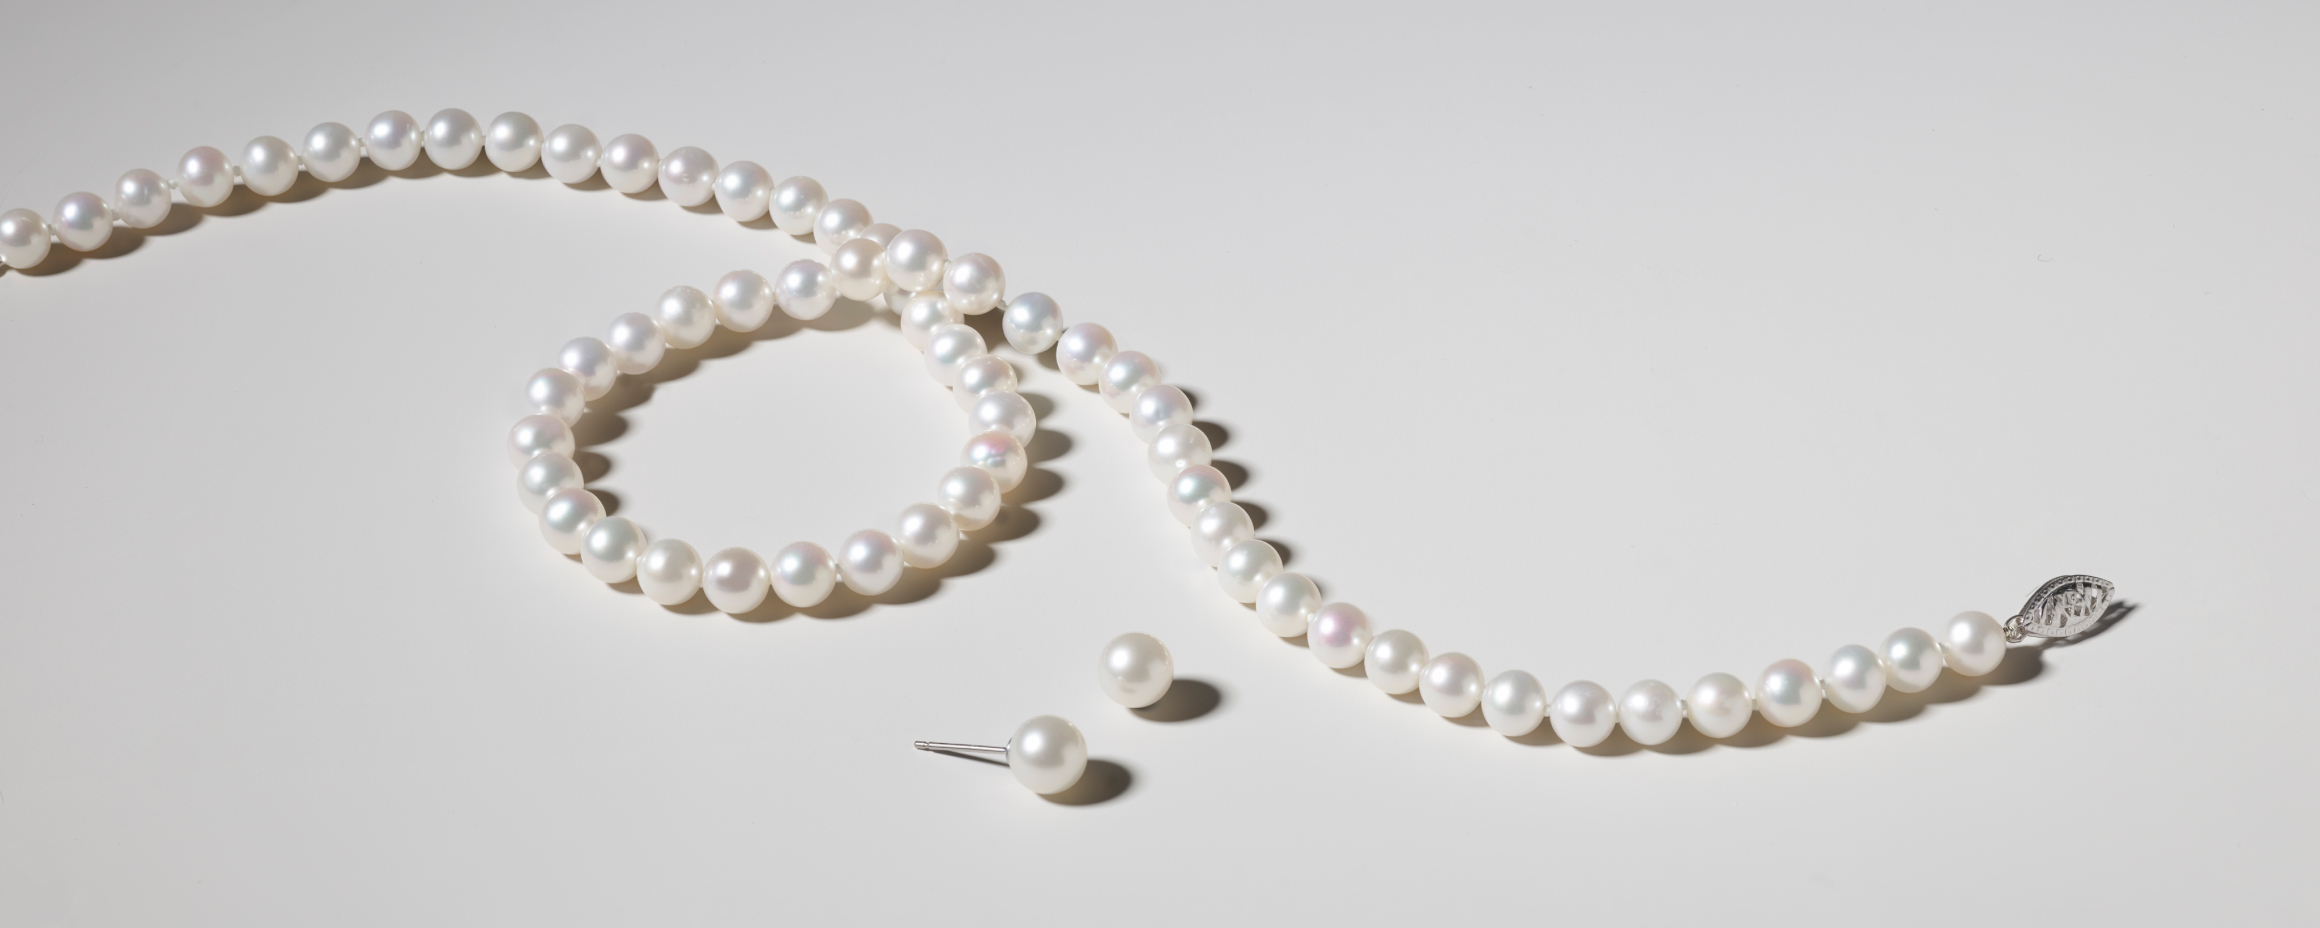 What Makes Our Pearls Special